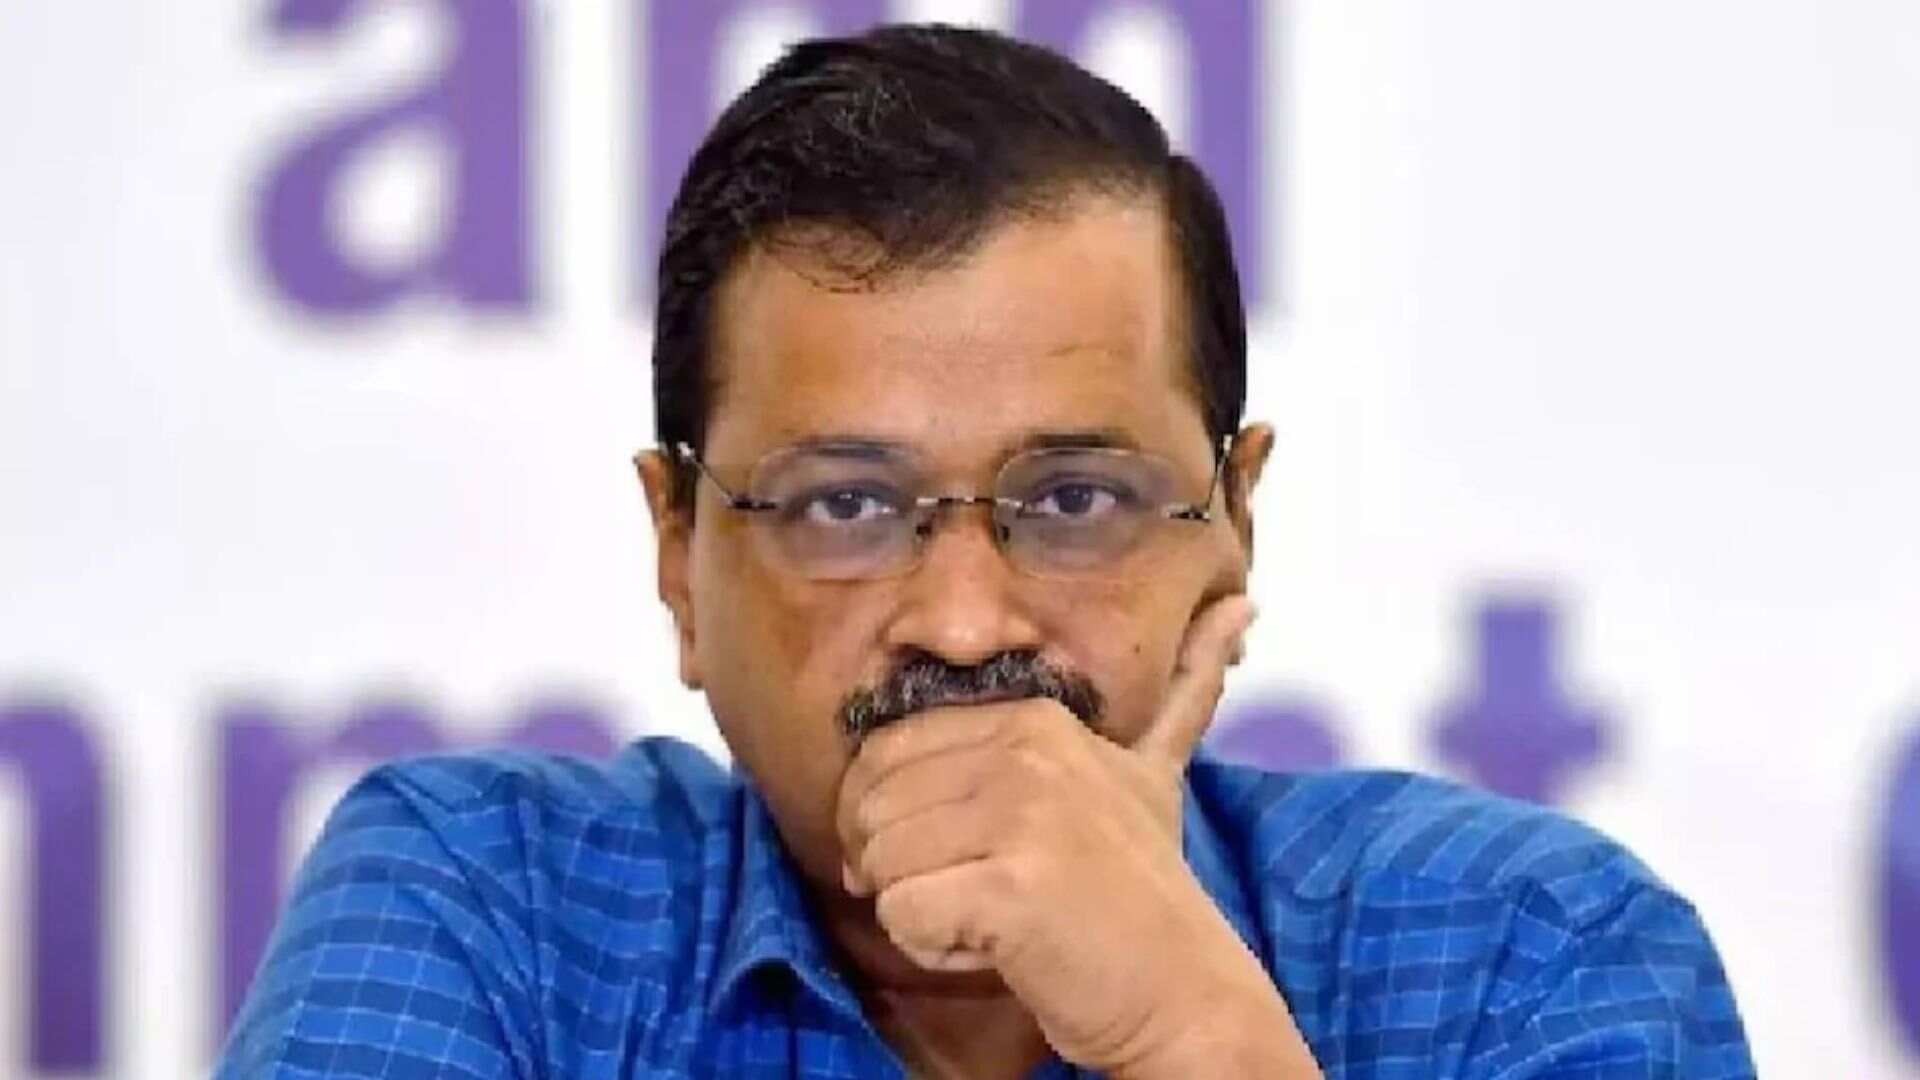 Delhi Court: Election Campaign Shows AAP Leader Kejriwal Is Not Suffering from Life-Threatening Disease, Diabetes Not Serious